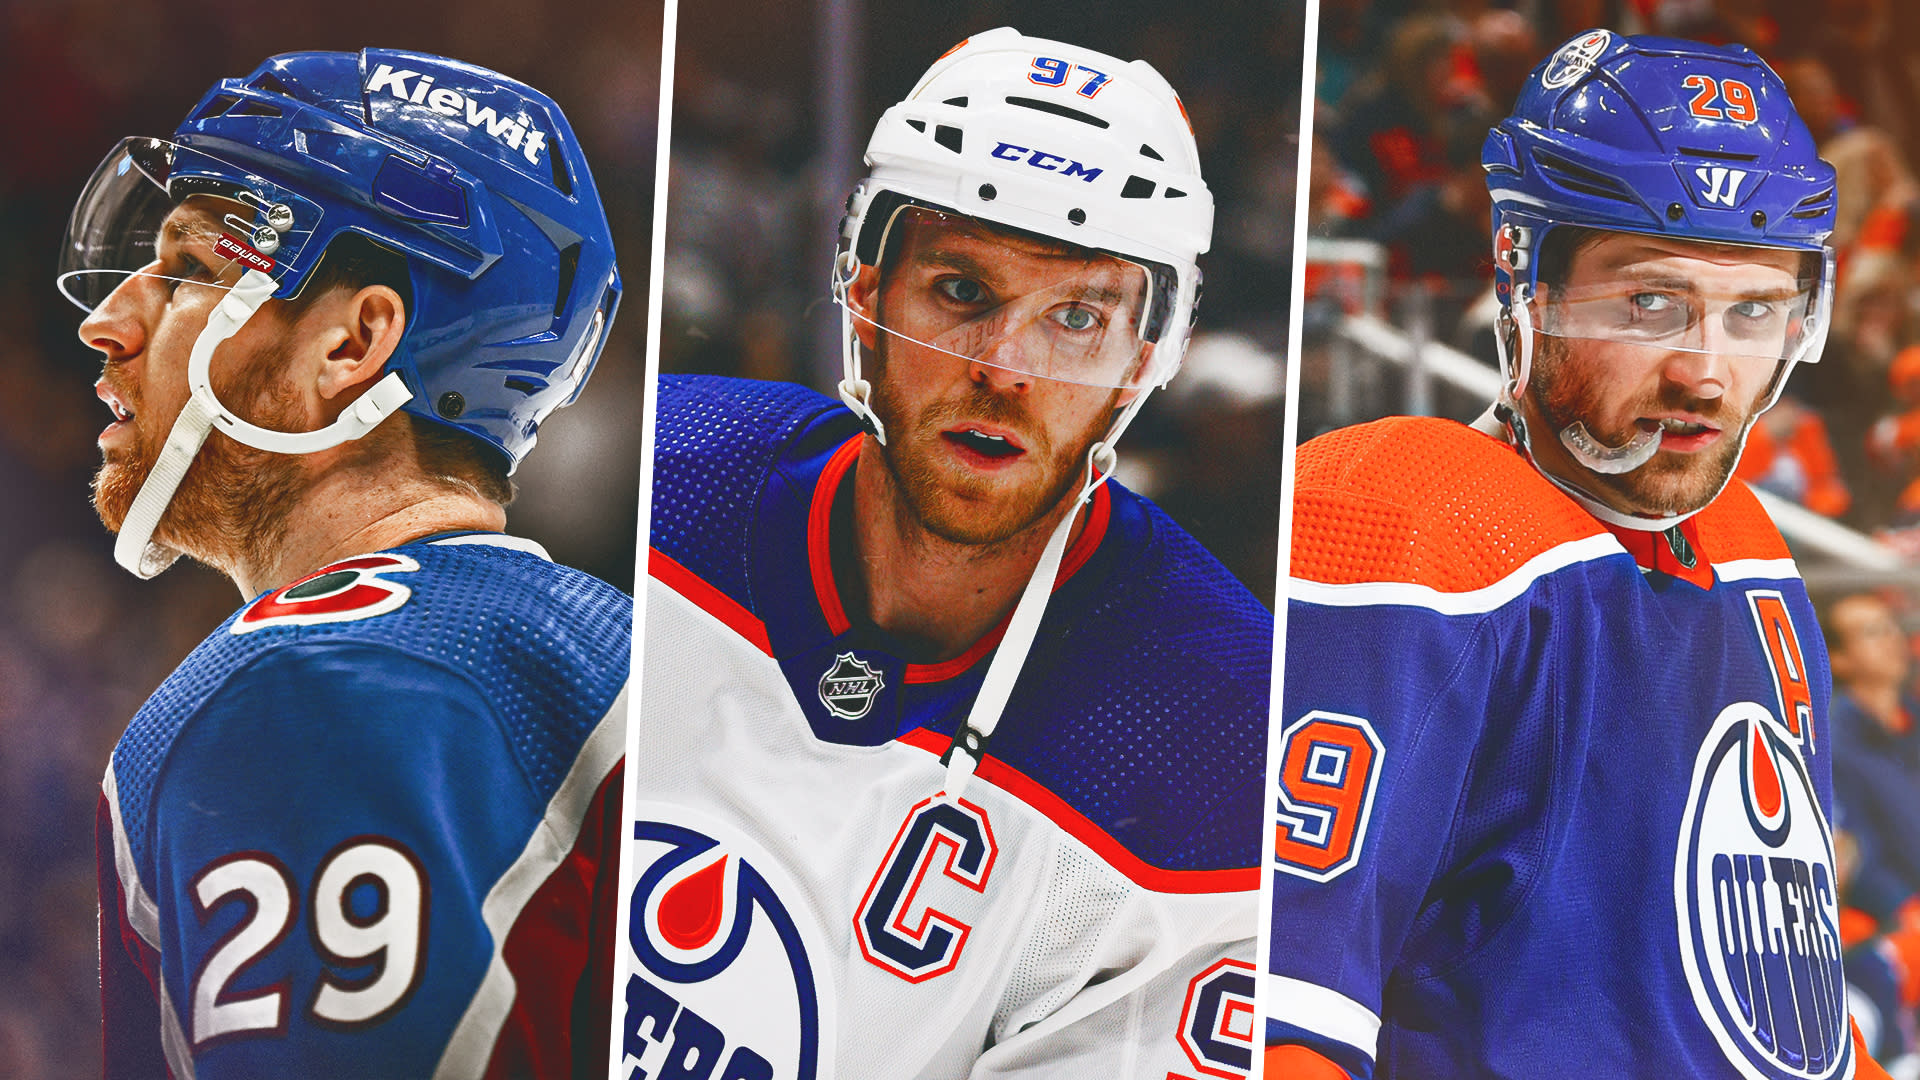 NHL on X: The matchups are set for #StanleyCup Playoffs. It's